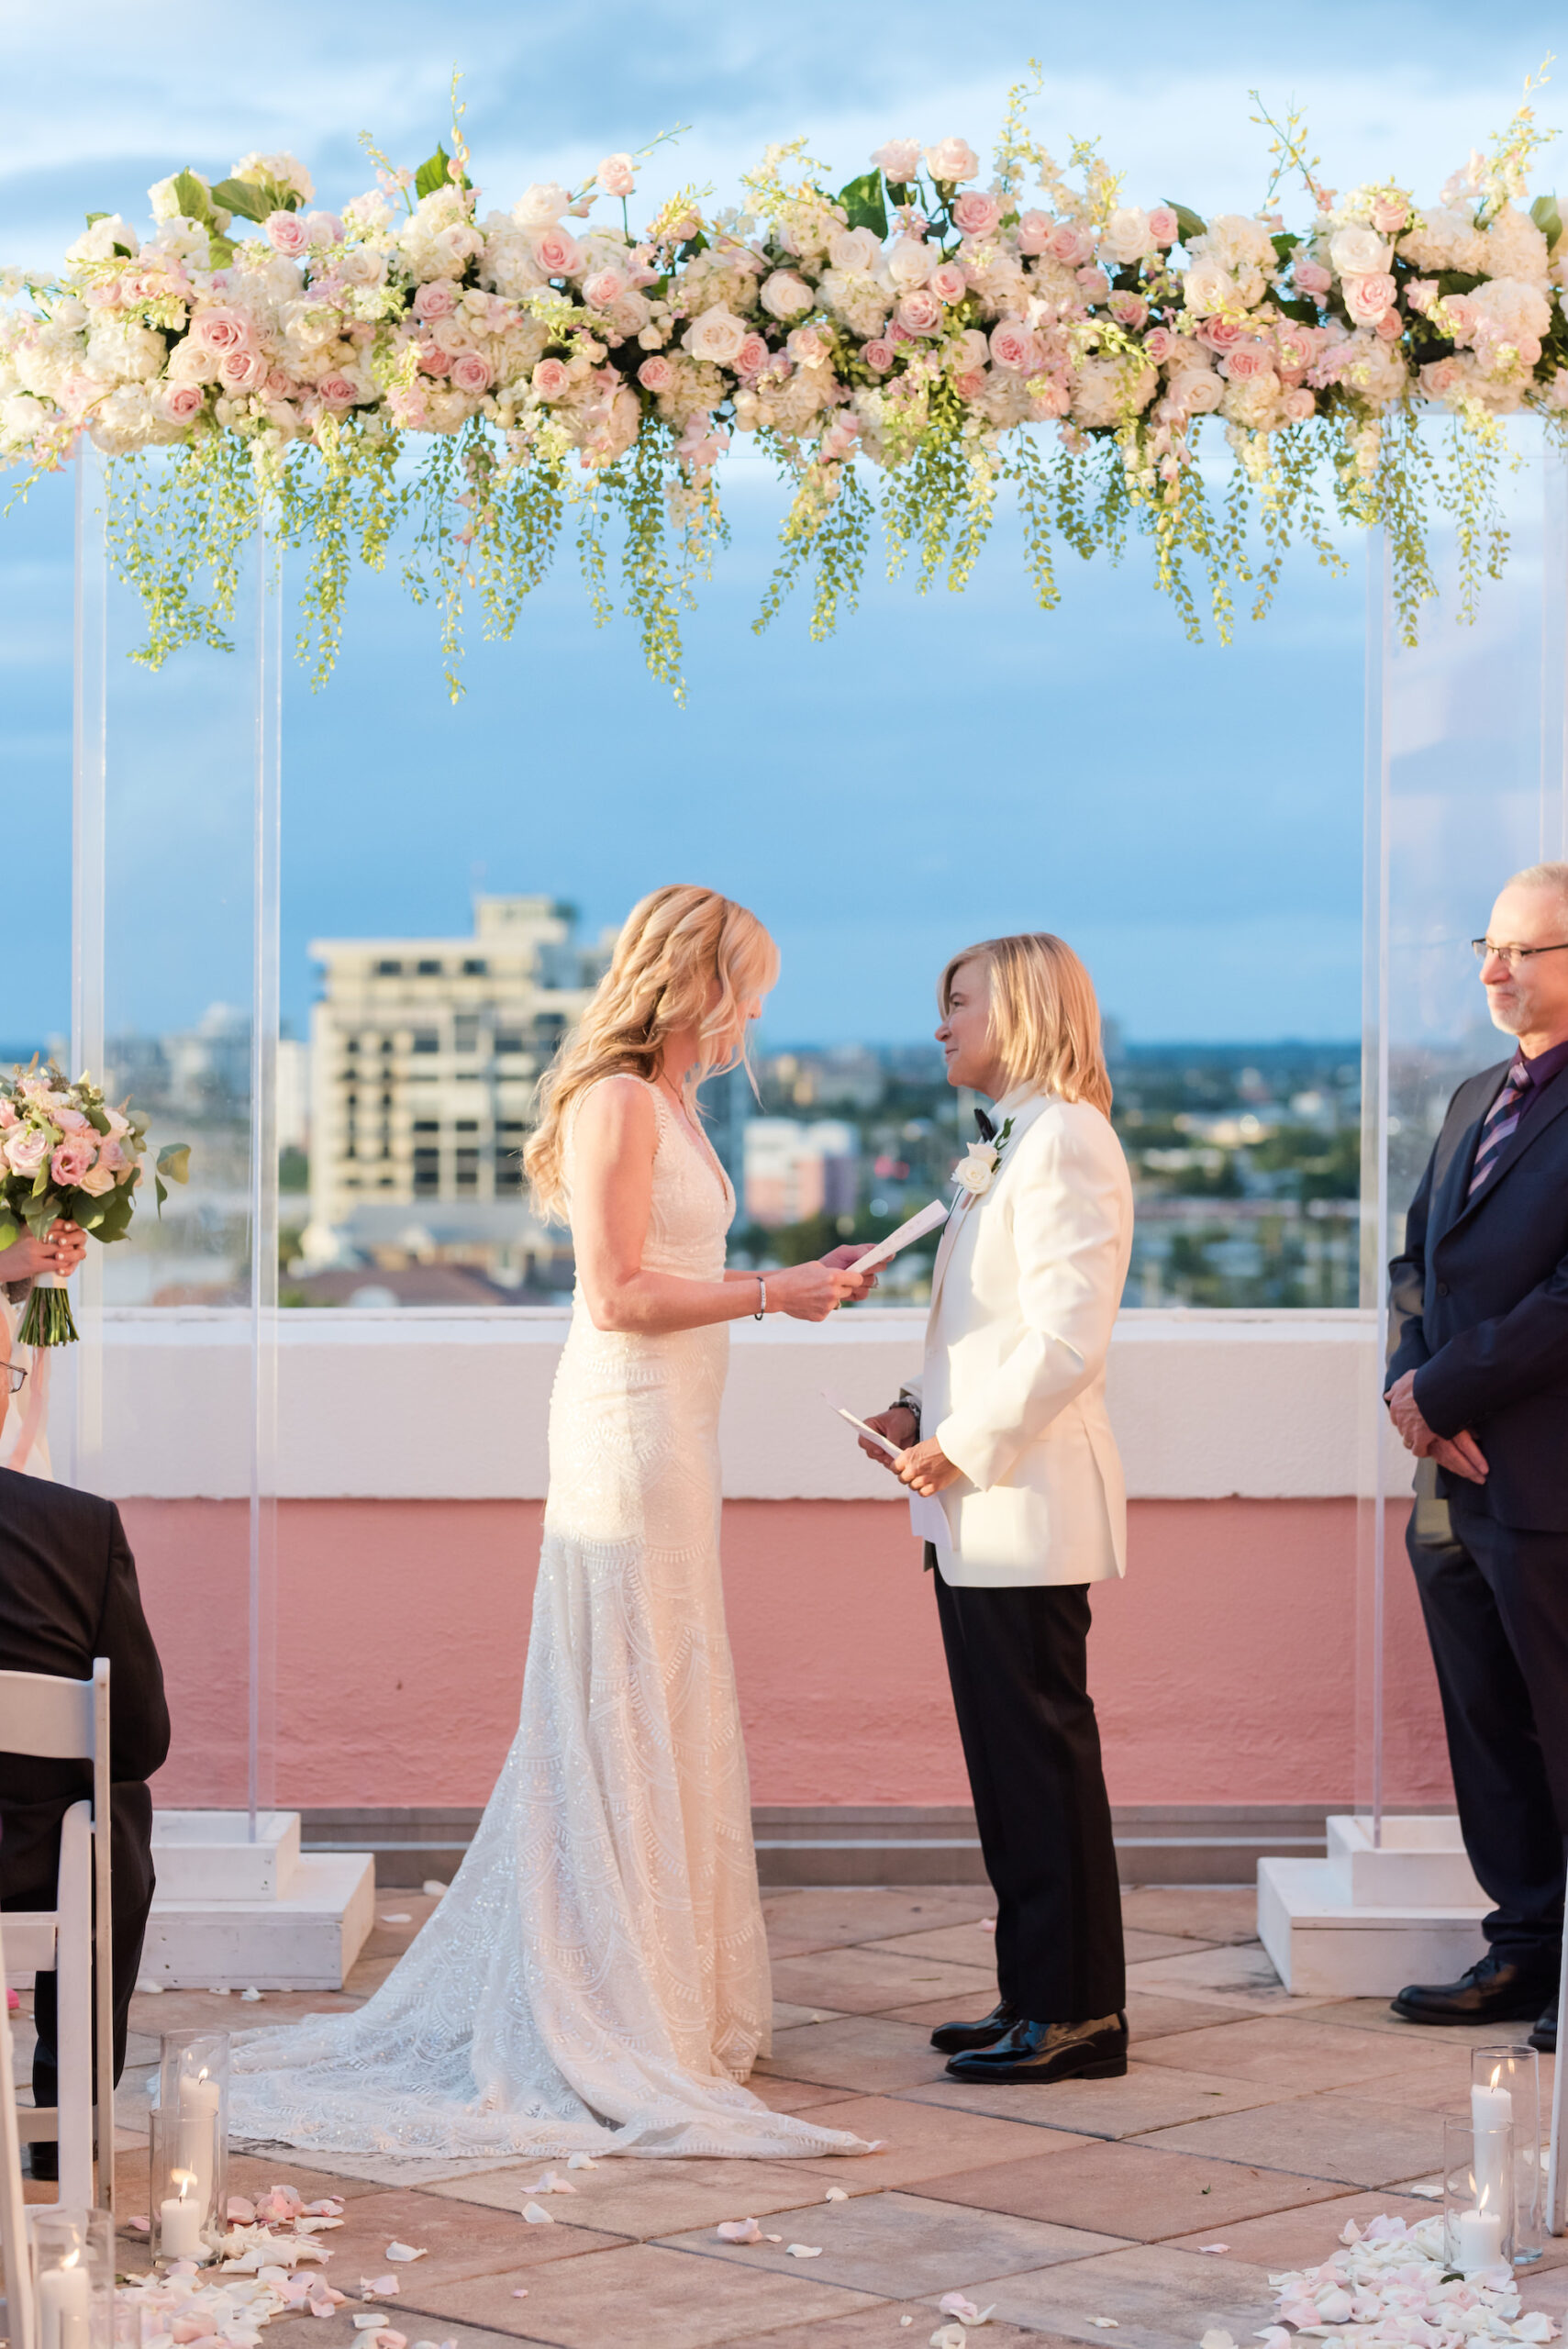 Lesbian Bride Exchanging Wedding Ceremony Vows, Elegant Blush Pink Same Sex Wedding, Modern Acrylic Arch with Lush Floral Arrangement, Hanging Greenery, White Hydrangeas, Blush Pink and Ivory Roses | Tampa Bay Wedding Photographer Amanda Zabrocki Photography | Clearwater Wedding Planner Elegant Affairs by Design | Wedding Florist Save the Date Florida | Rooftop Beach Waterfront St. Pete Wedding Venue The Don CeSar